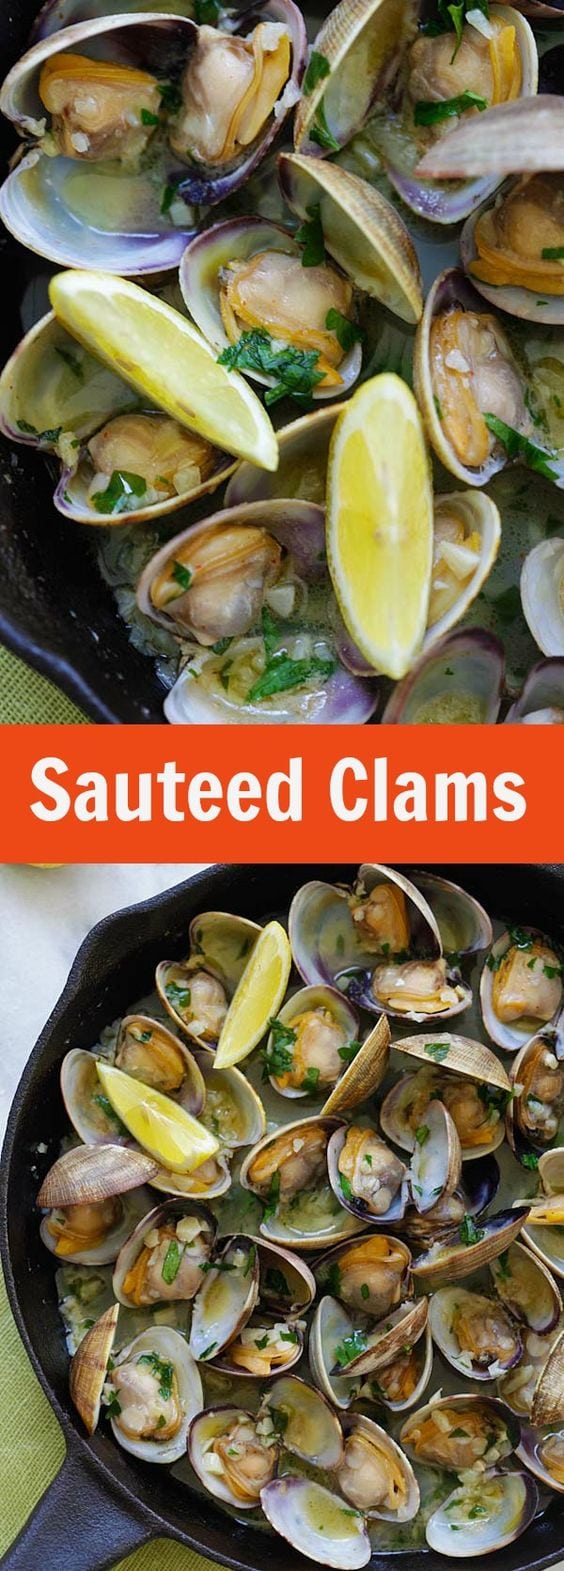 Sauteed Clams – Skillet clams with loads of garlic butter, white wine and parsley. The easiest sauteed clams recipe ever, 15 mins to make | rasamalaysia.com